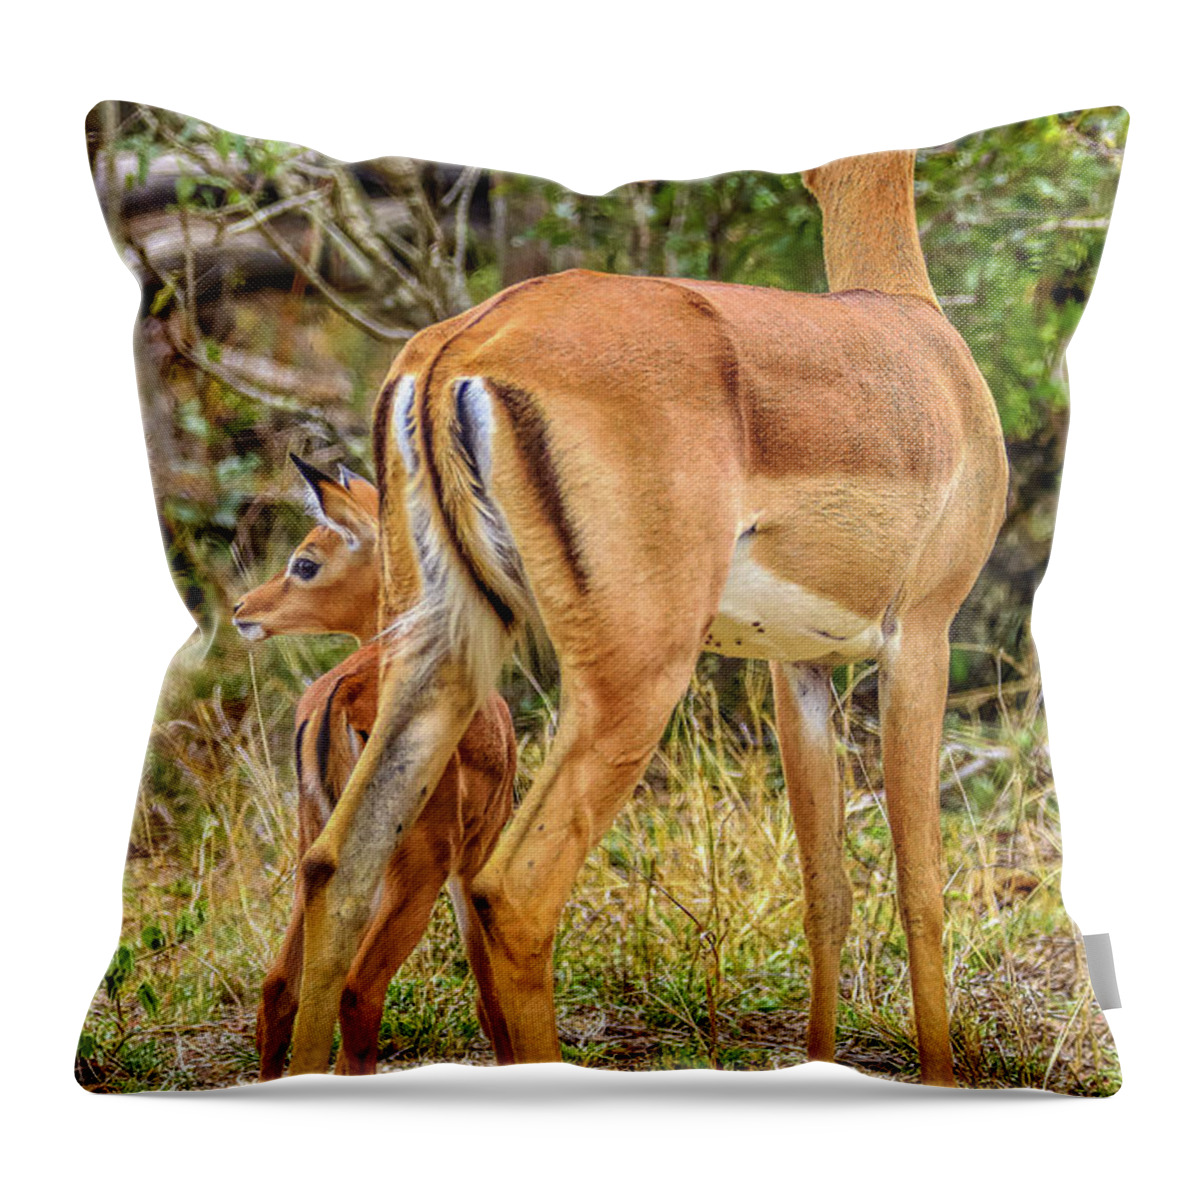 Kruger National Park South Africa Throw Pillow featuring the photograph Kruger National Park South Africa #19 by Paul James Bannerman